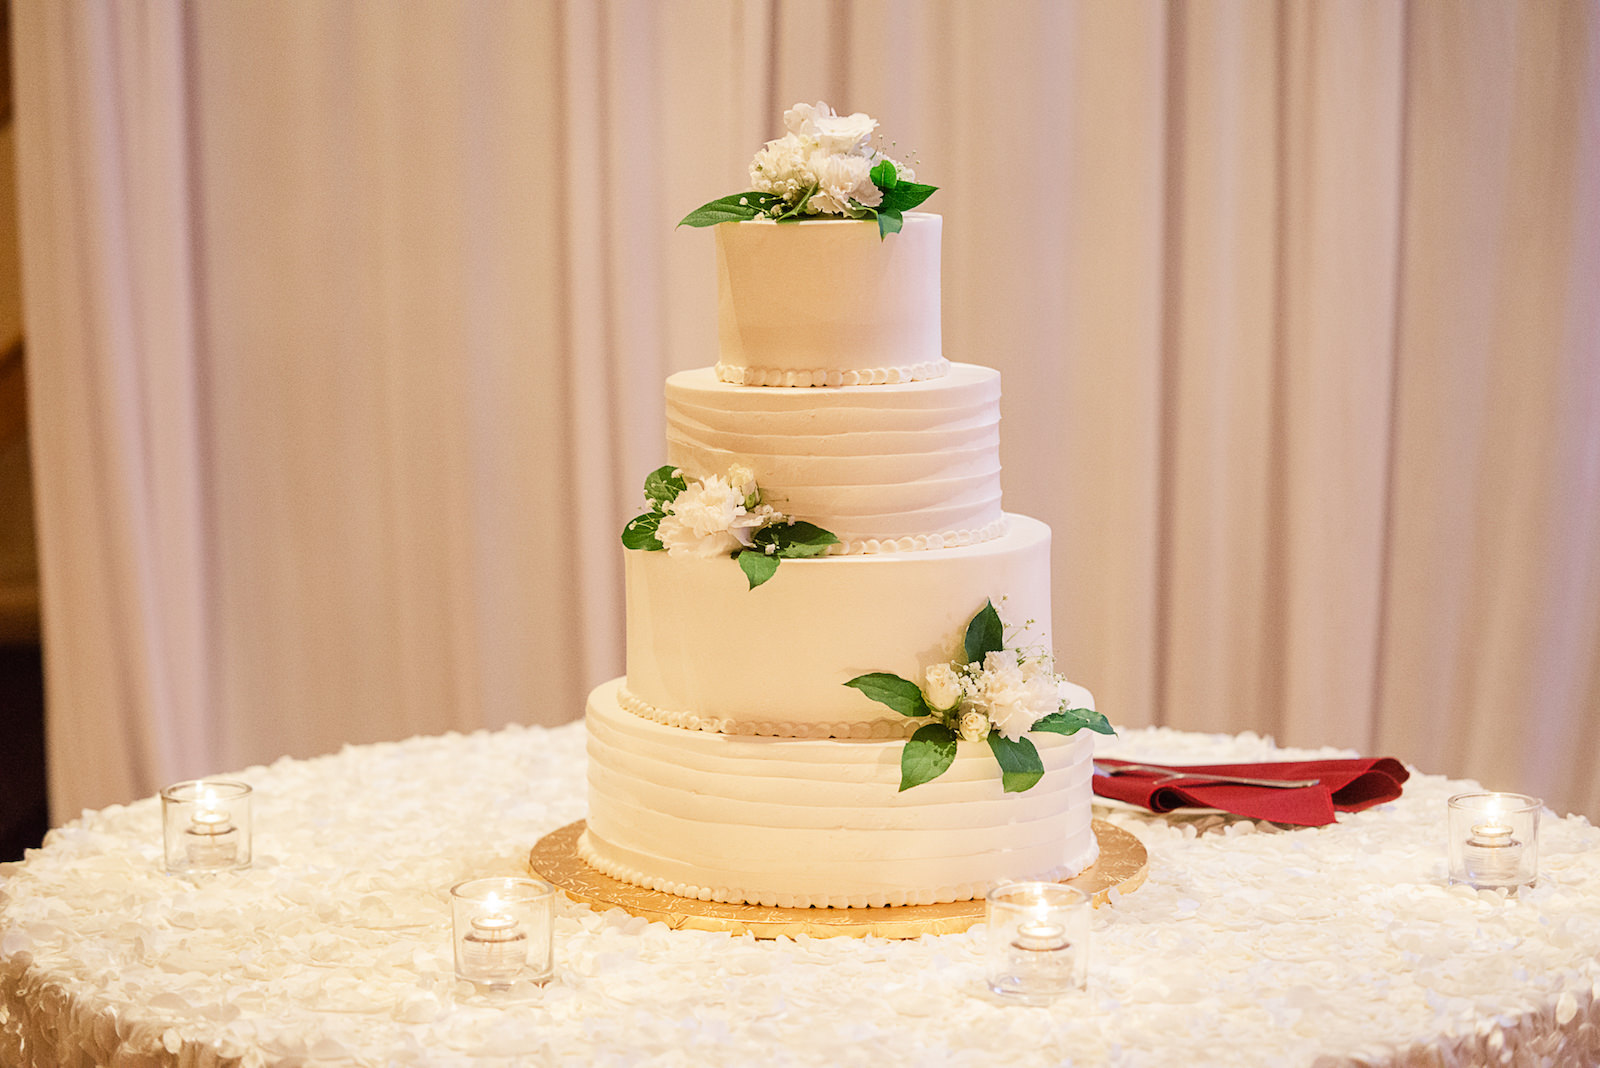 Four Tier White Wedding Cake with Greenery and White Floral Detail